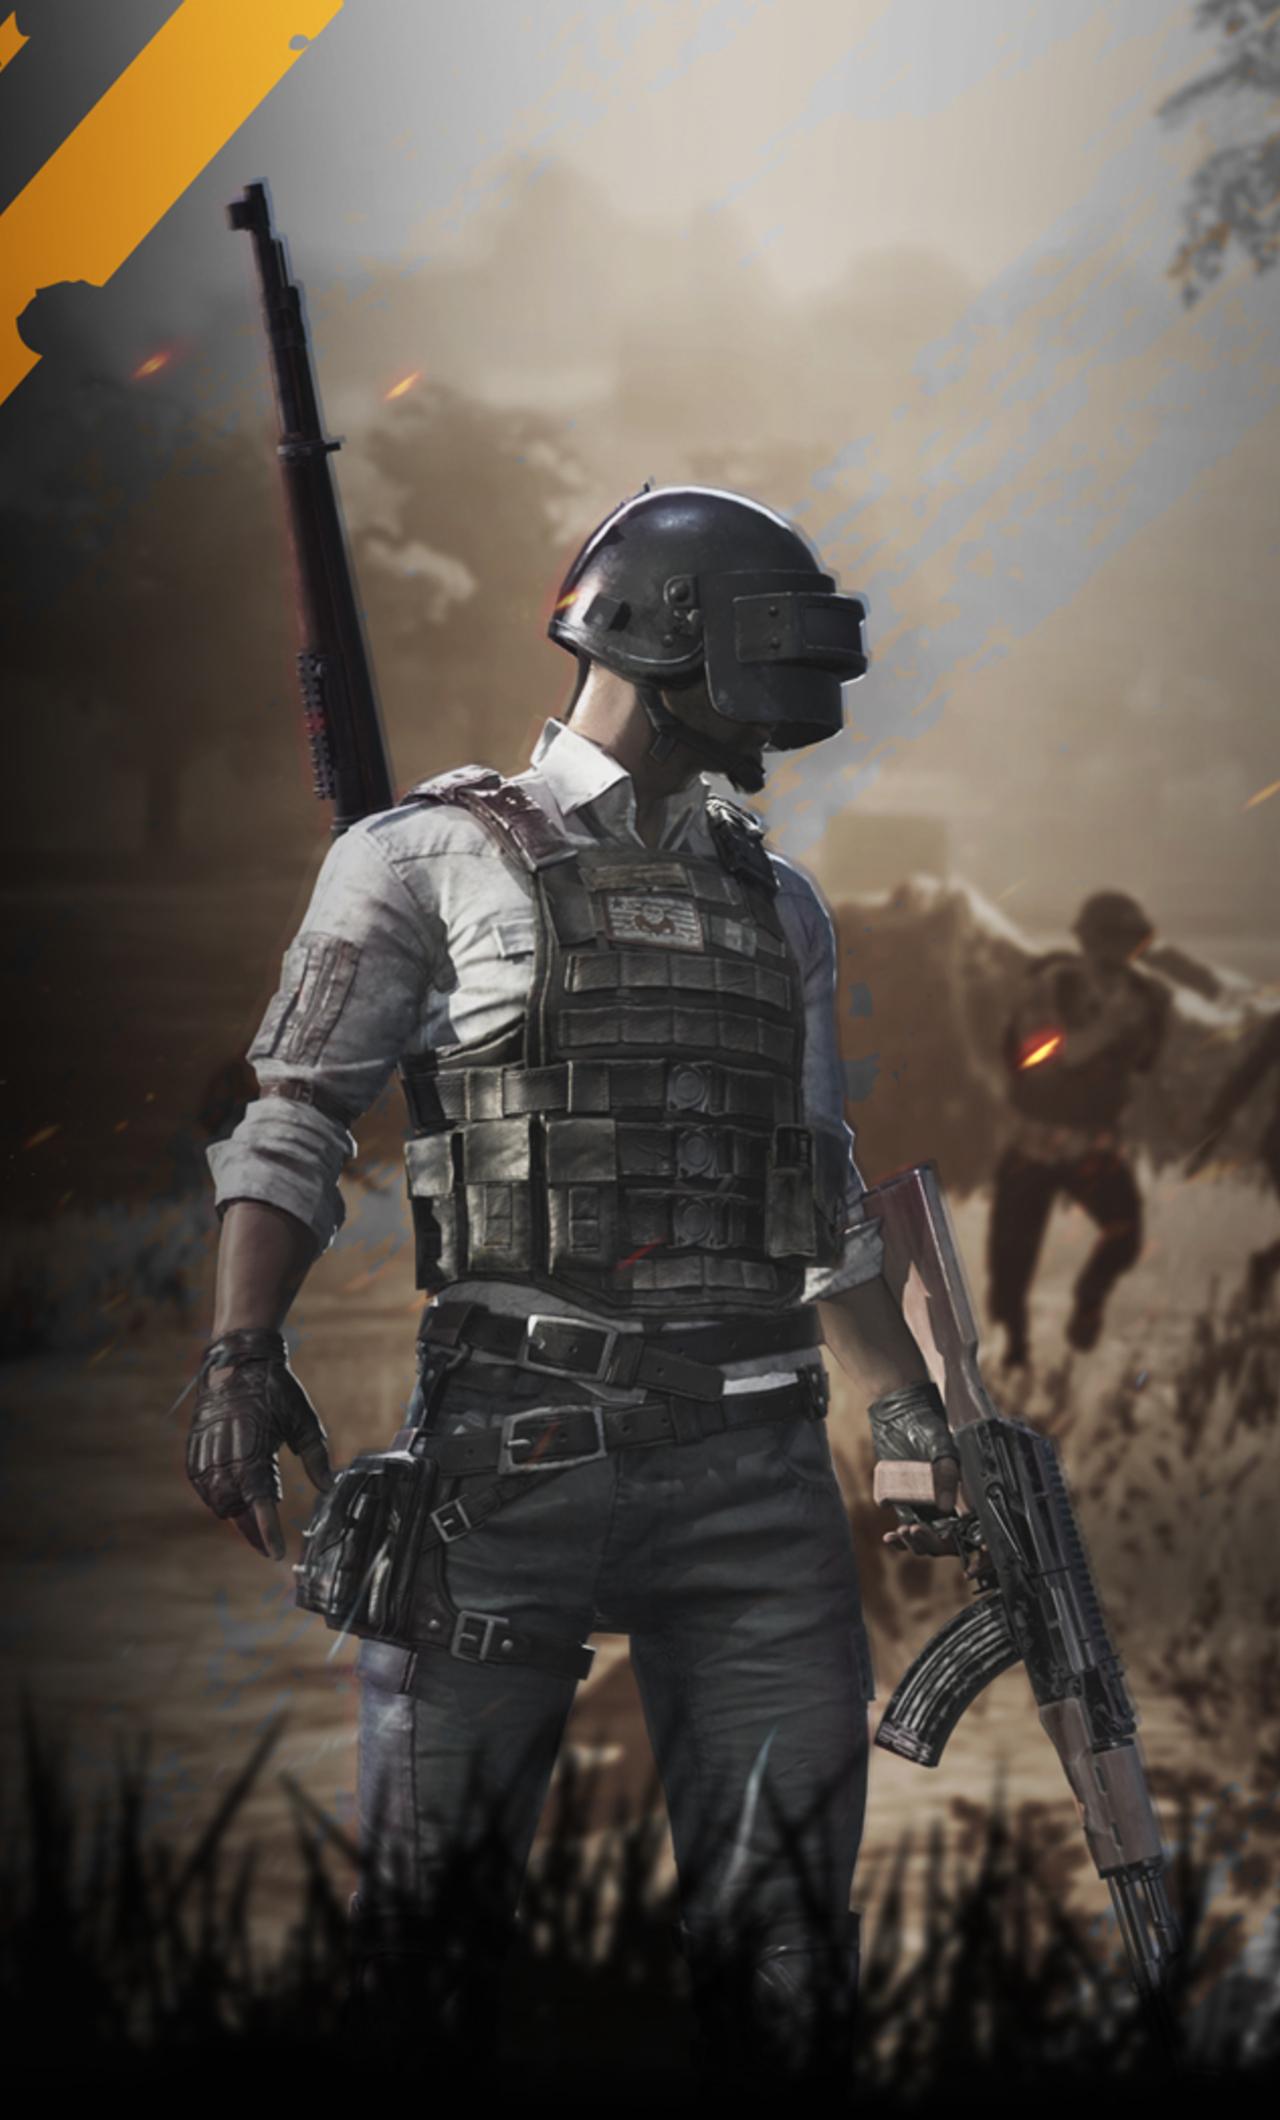 Pubg Mobile Wallpaper For iPhone 6. Pubg Free Gift Codes